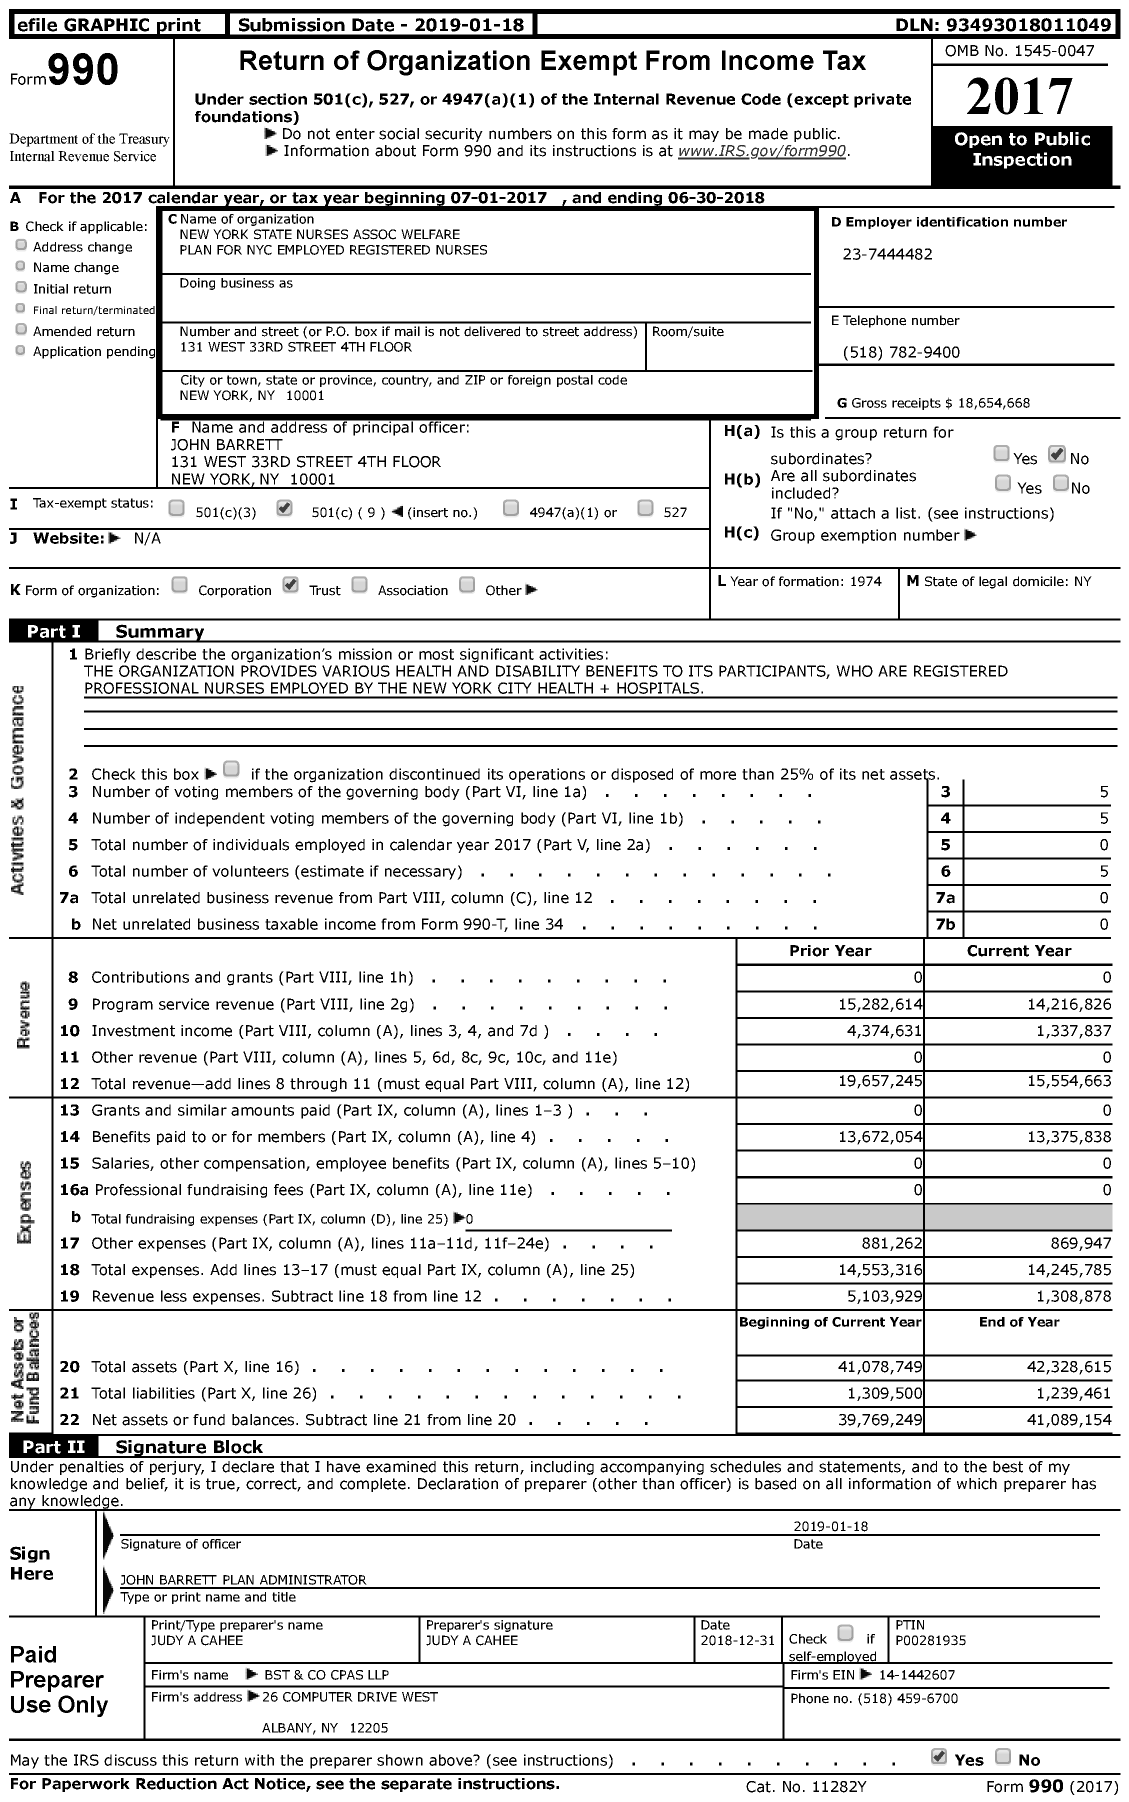 Image of first page of 2017 Form 990 for New York State Nurses Association Welfare Plan for Nyc Employed Registered Nurses